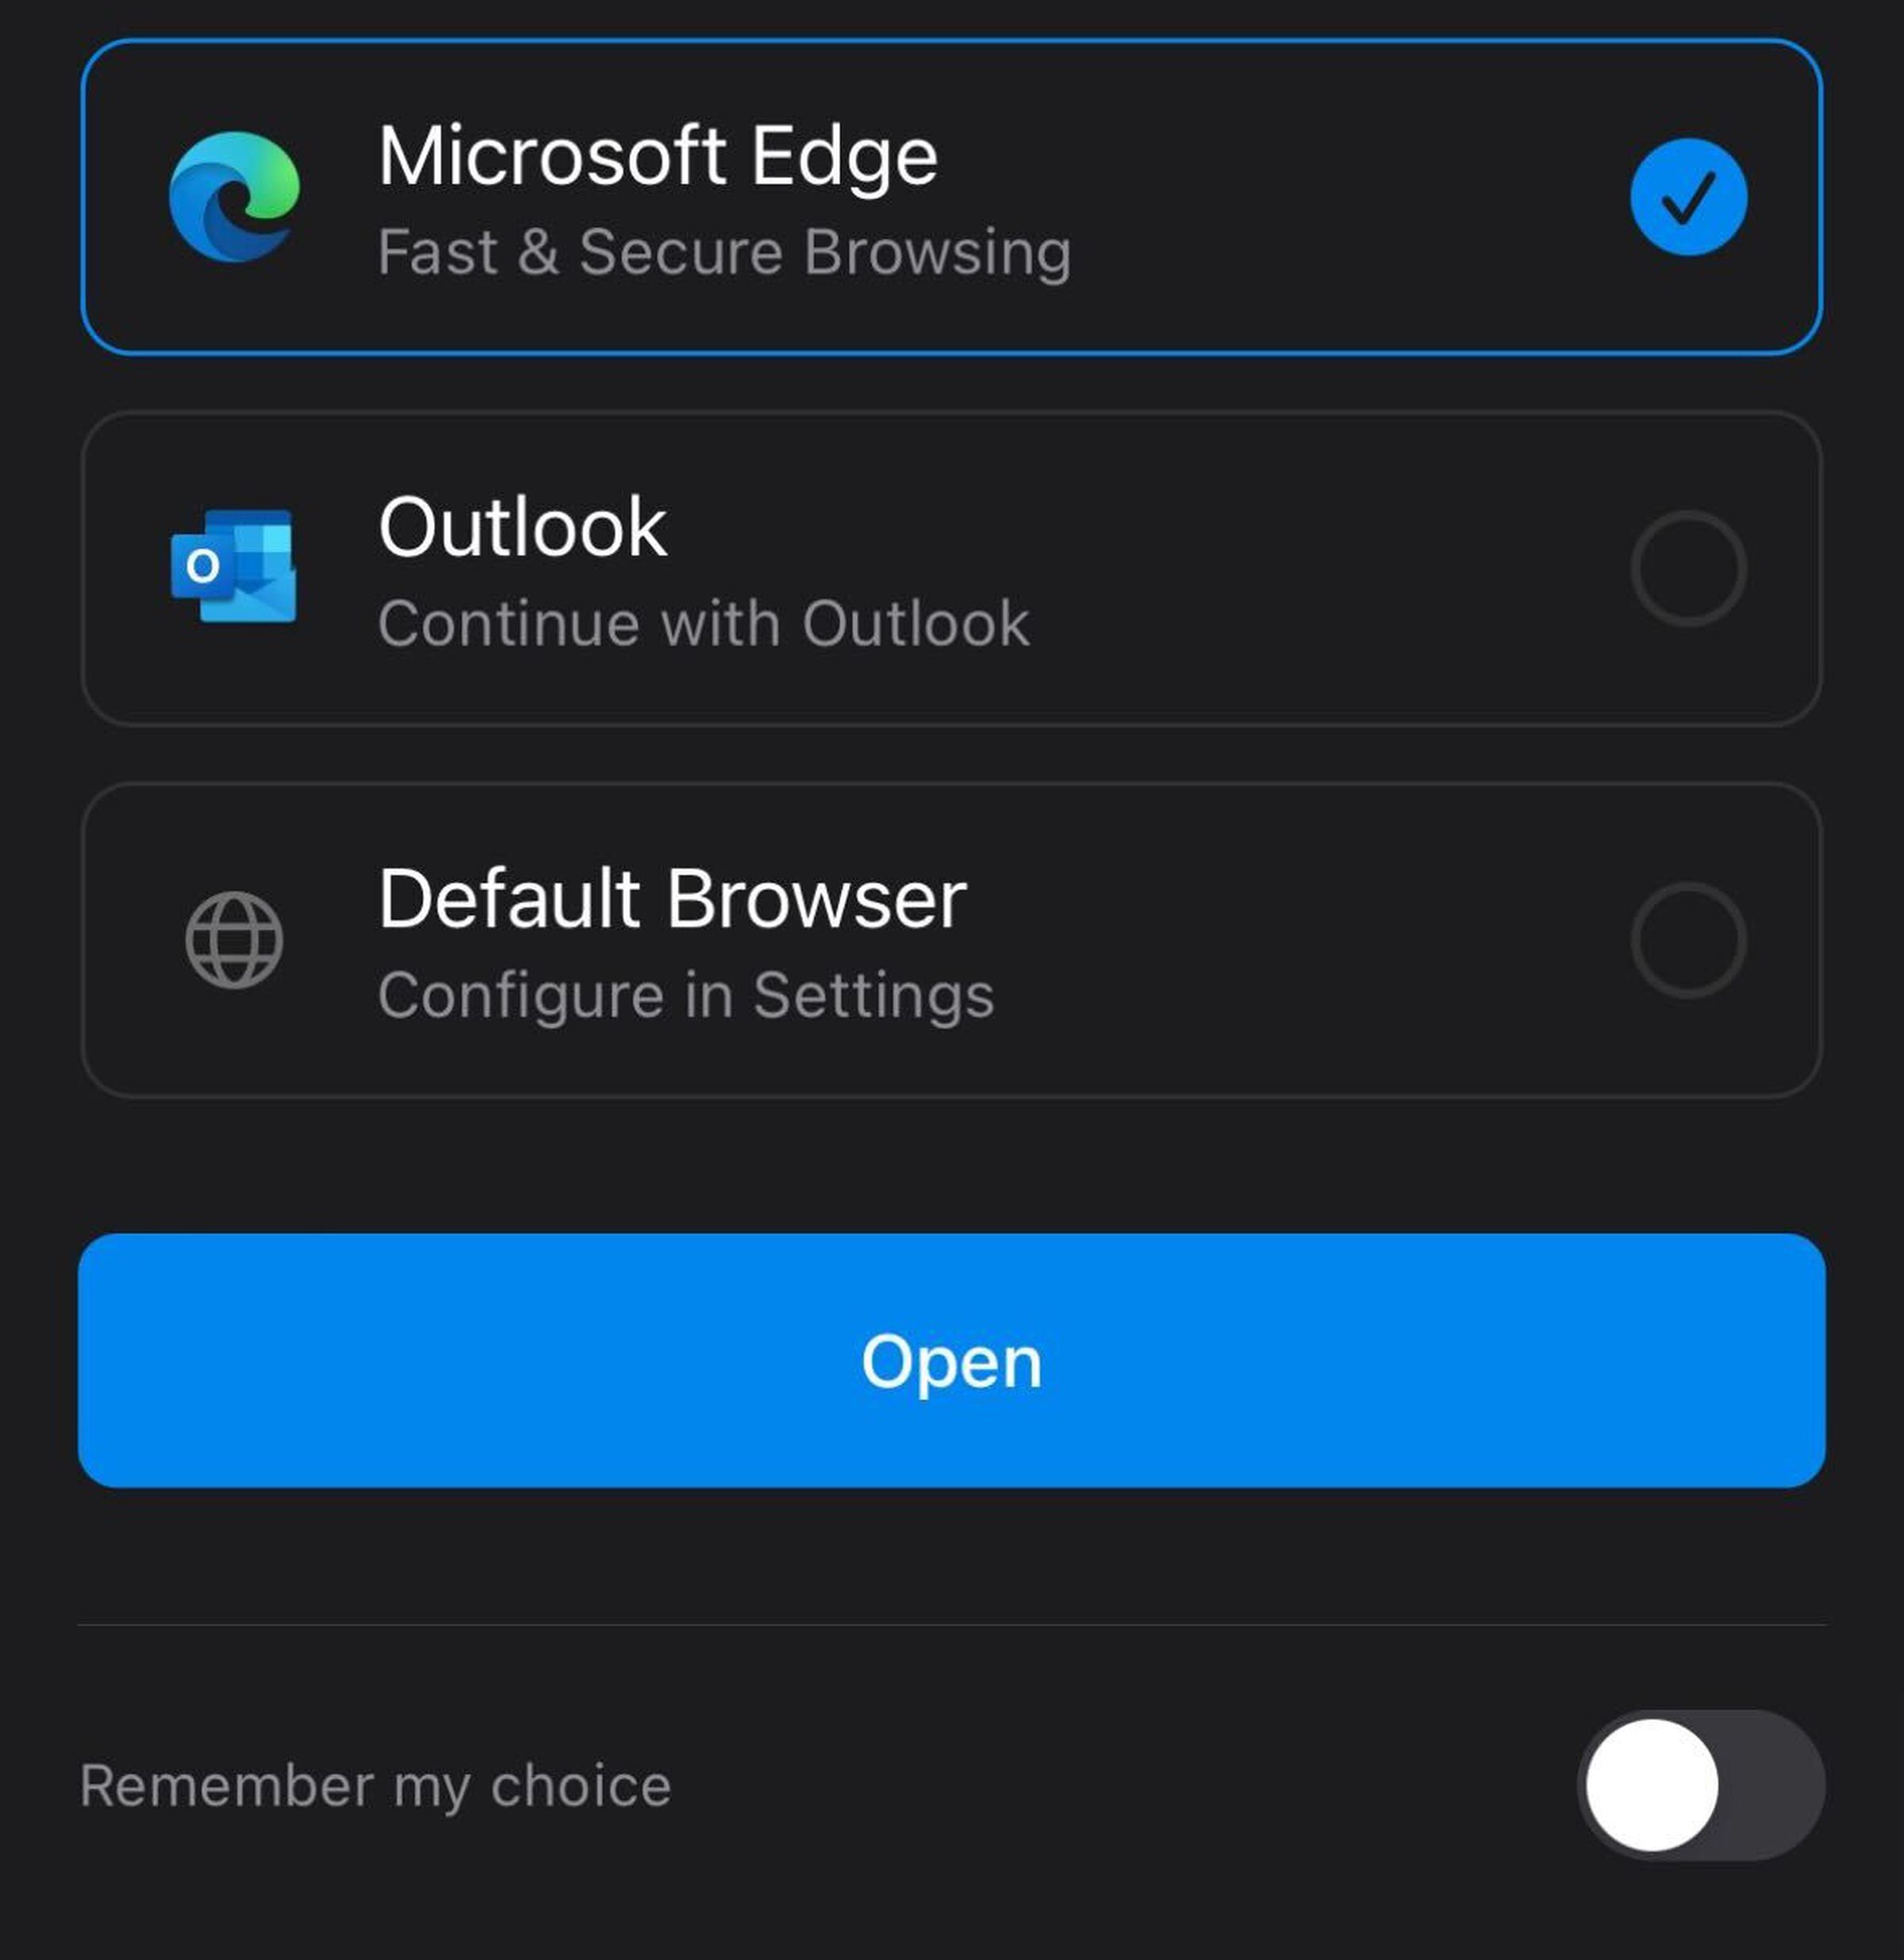 Outlook Mobile users are seeing a new Edge prompt.